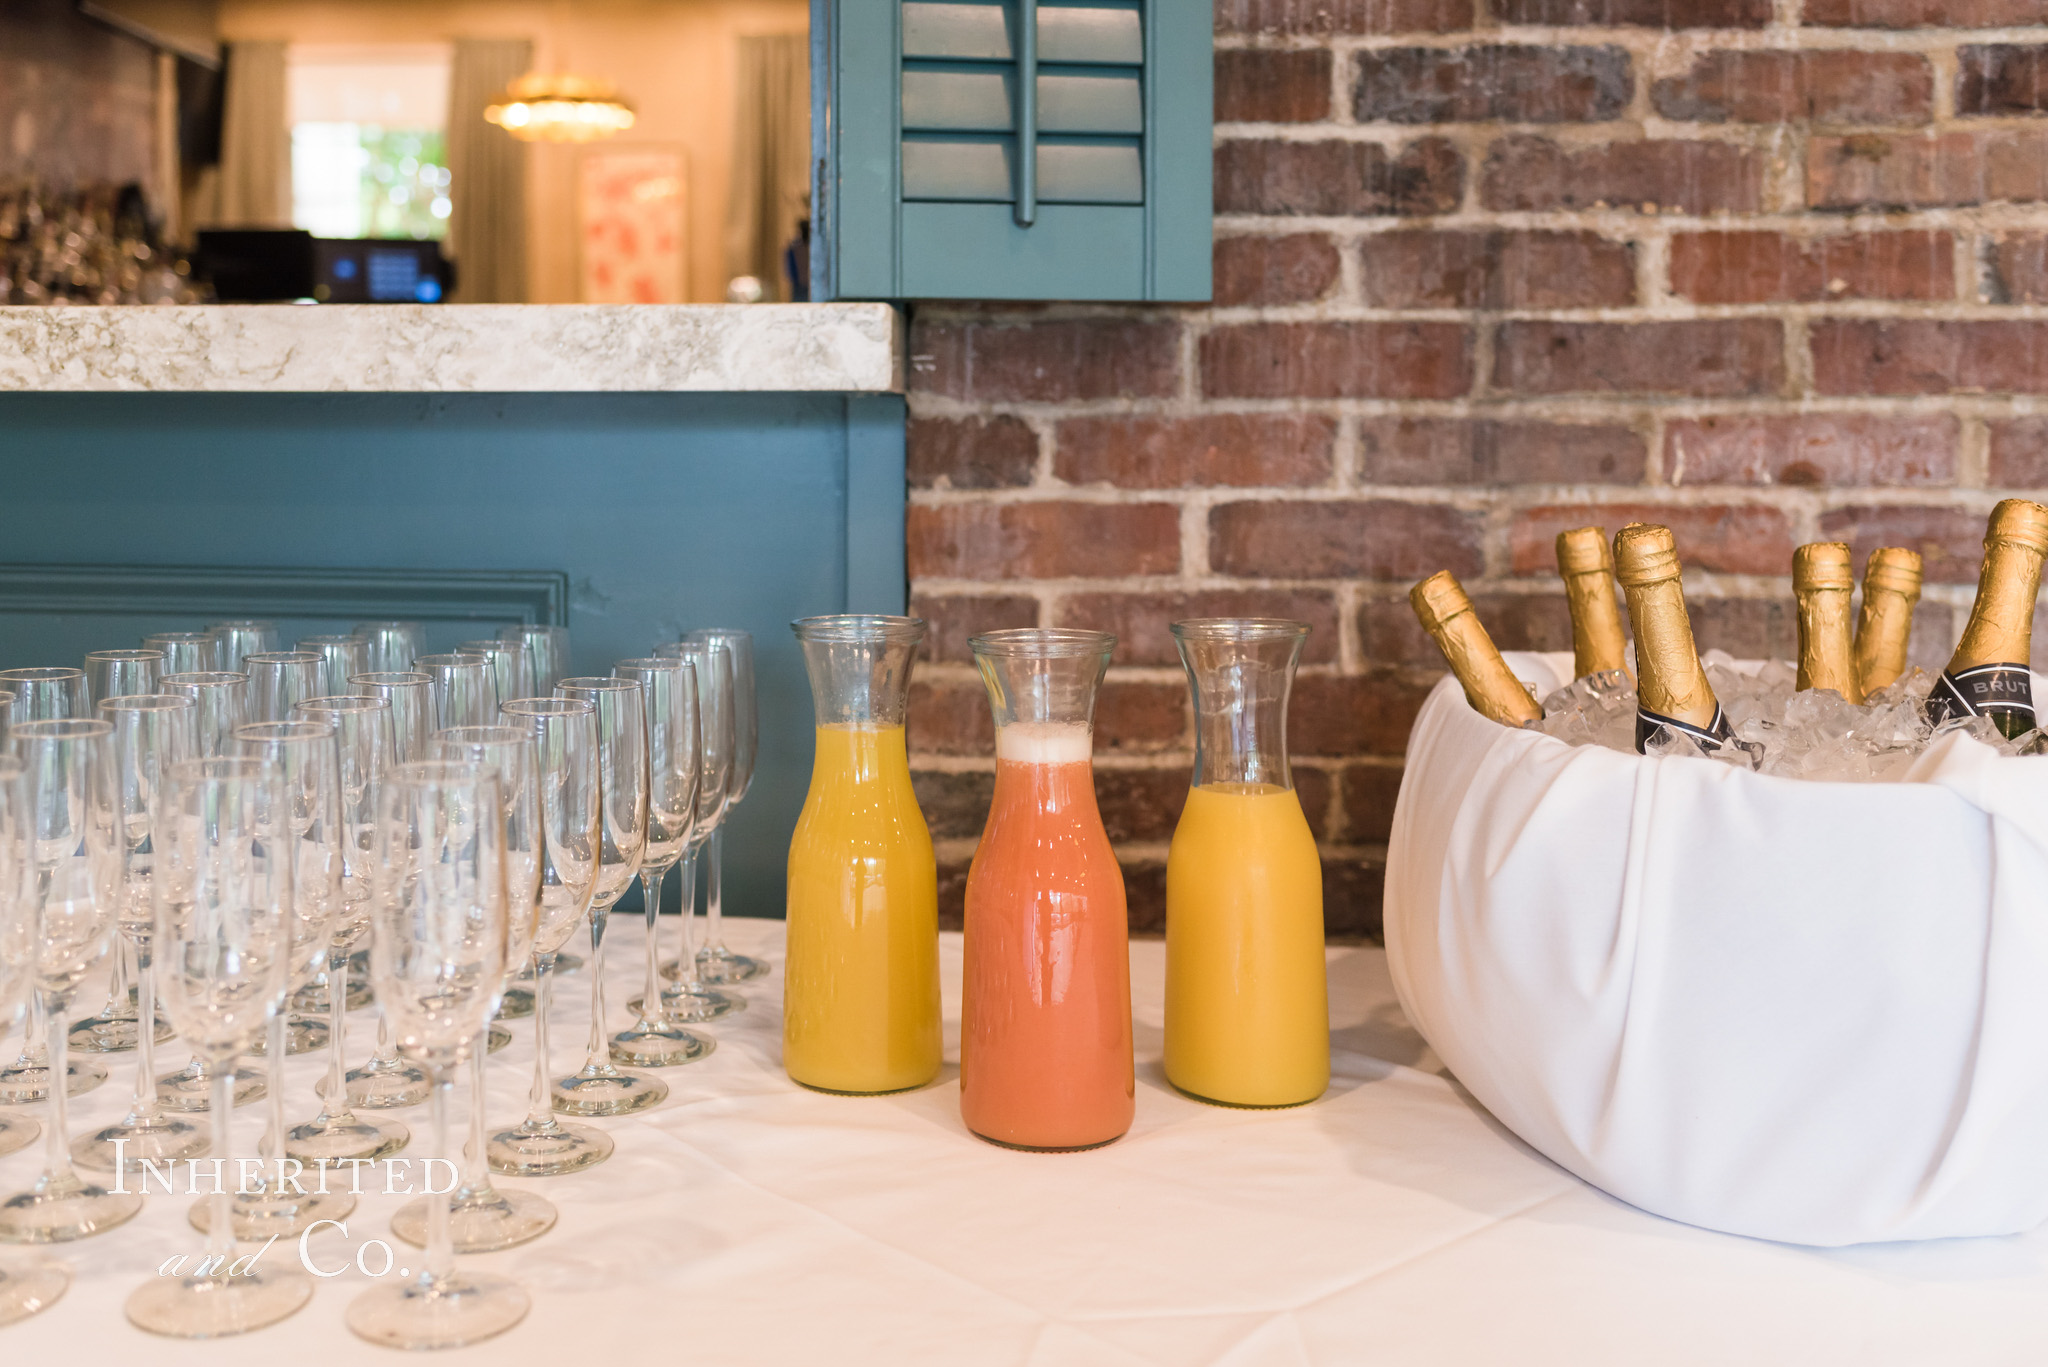 Mimosa Bar at the Inherited and Co. Website Launch Party